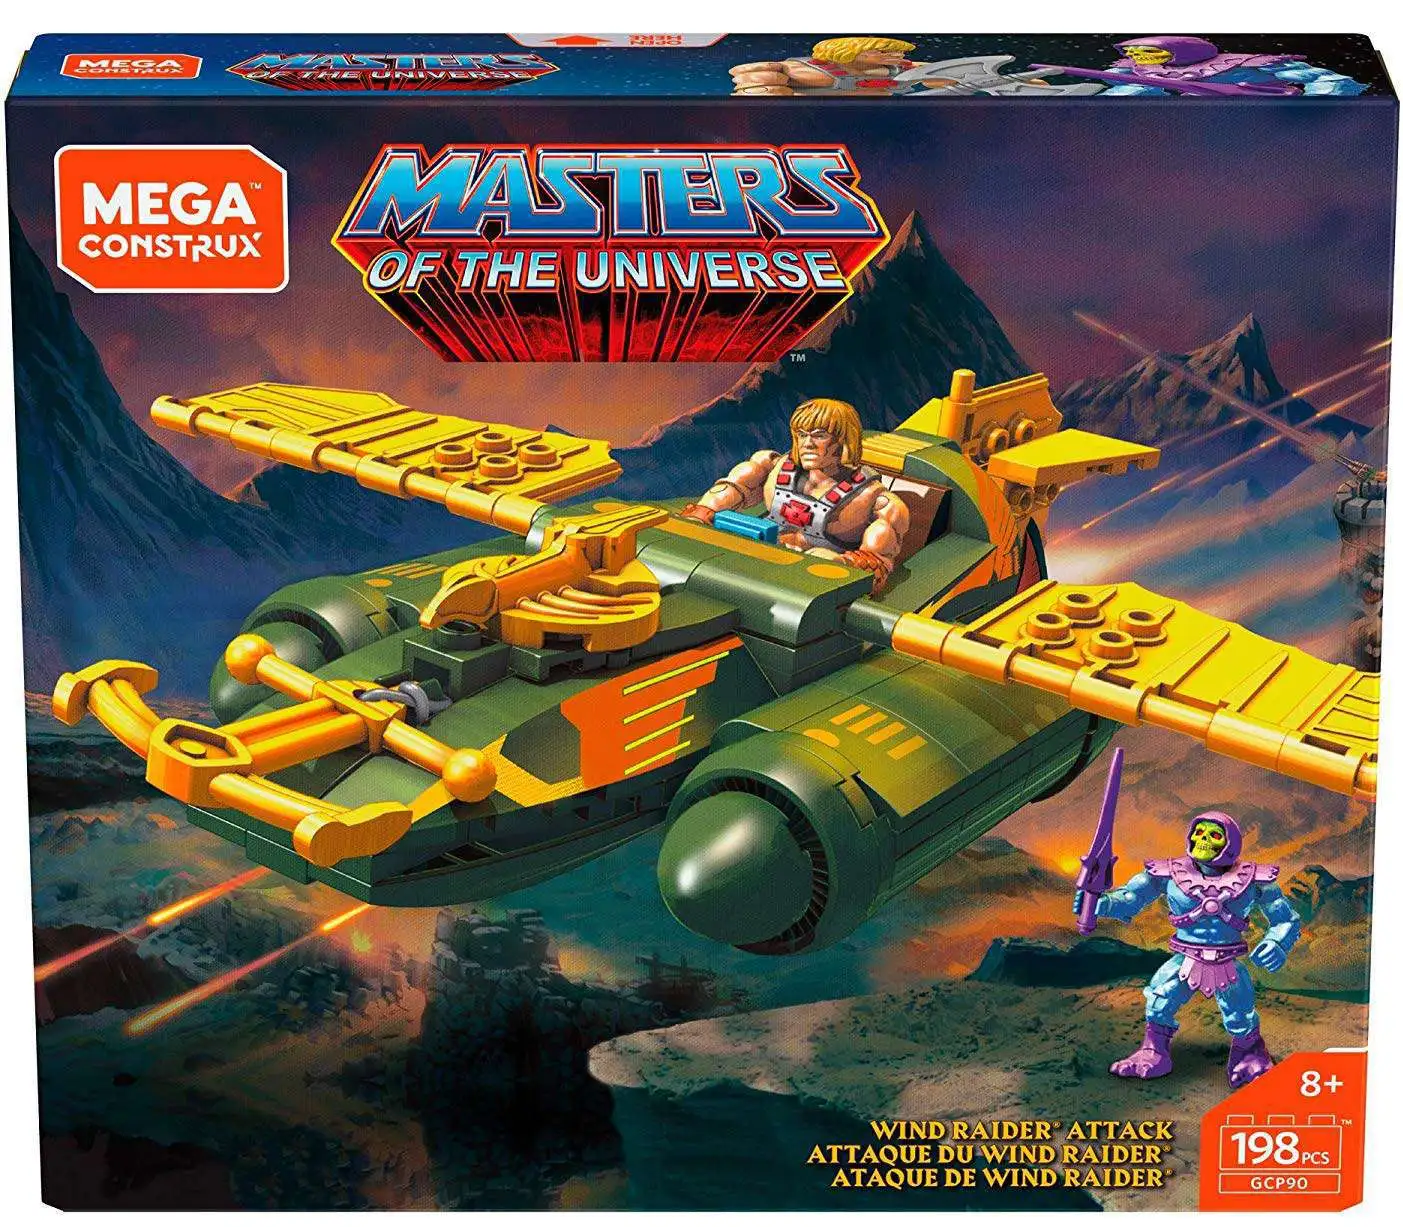 MEGA Construx Masters of The Universe Wind Raider Attack Set for sale online 